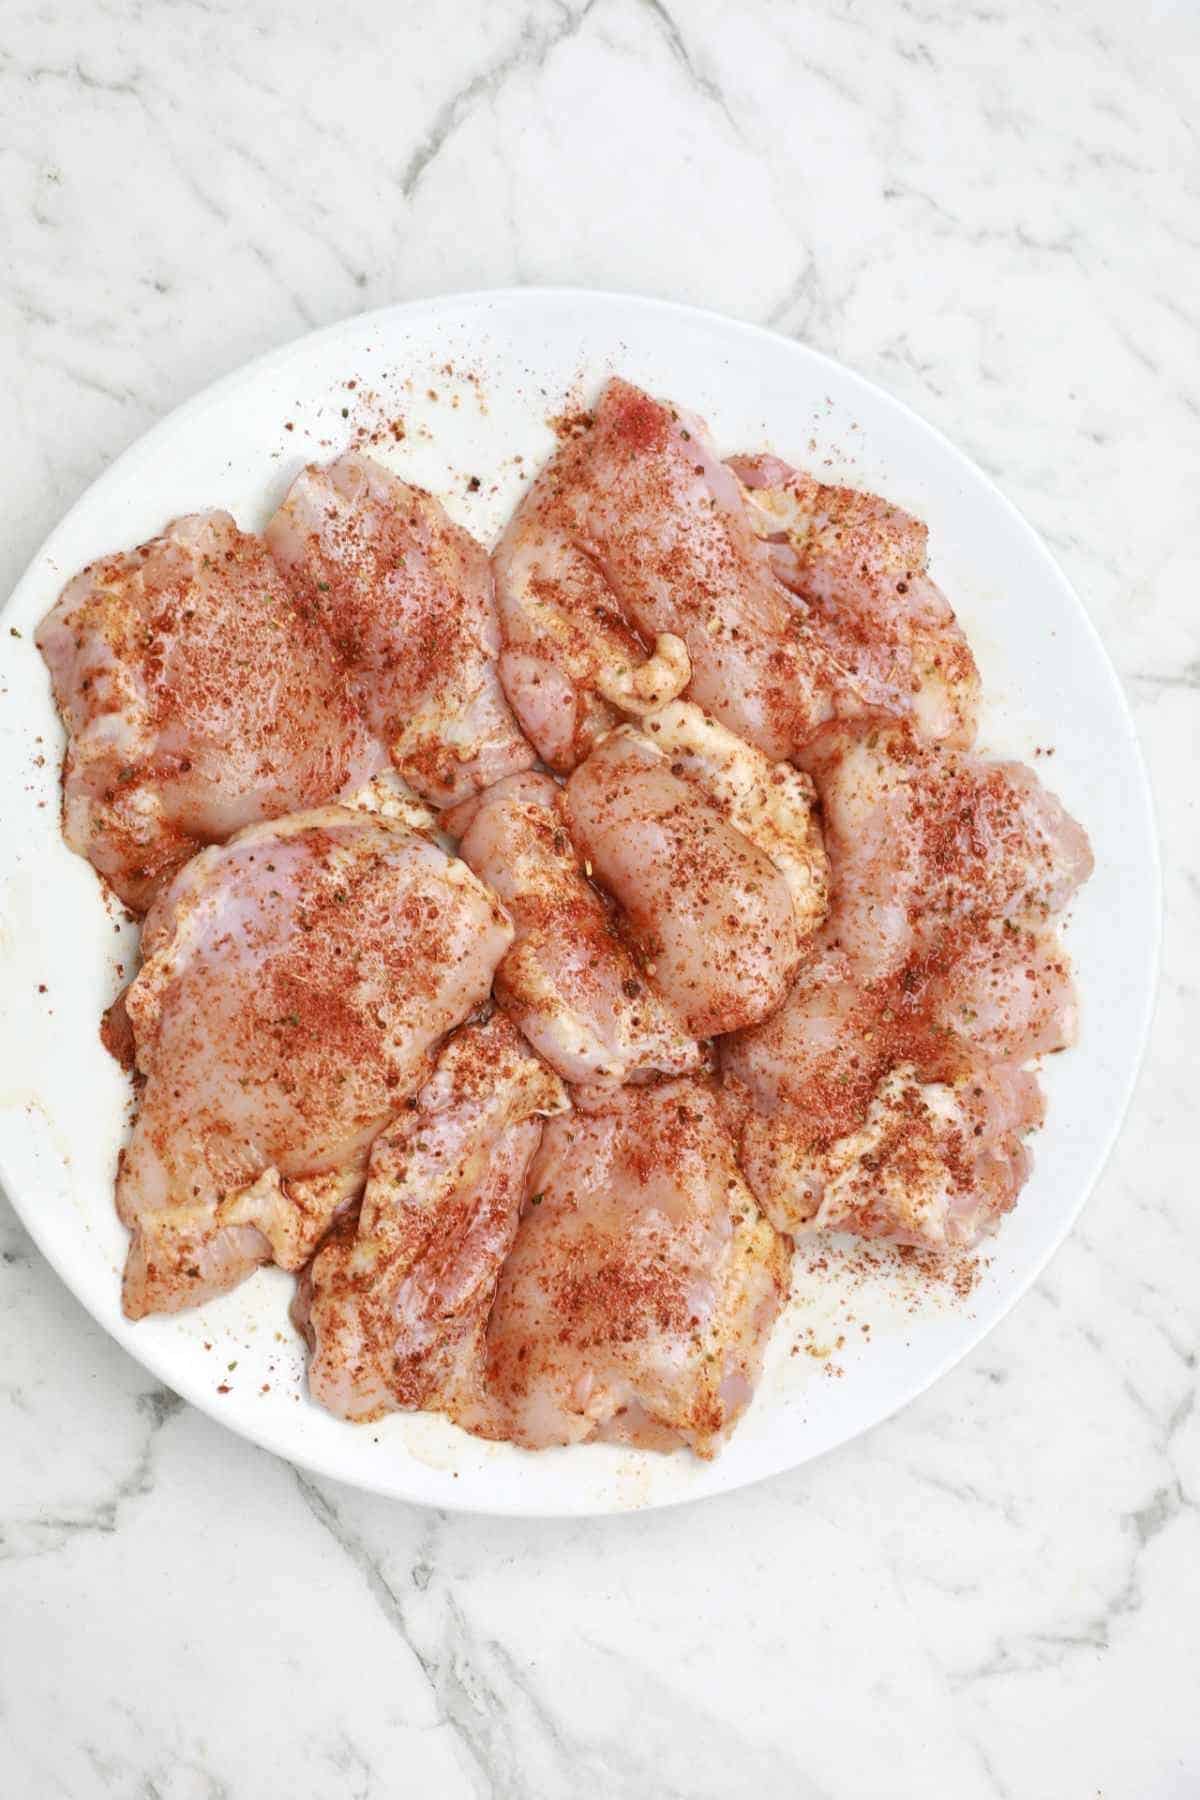 chicken thighs coated in seasoning.